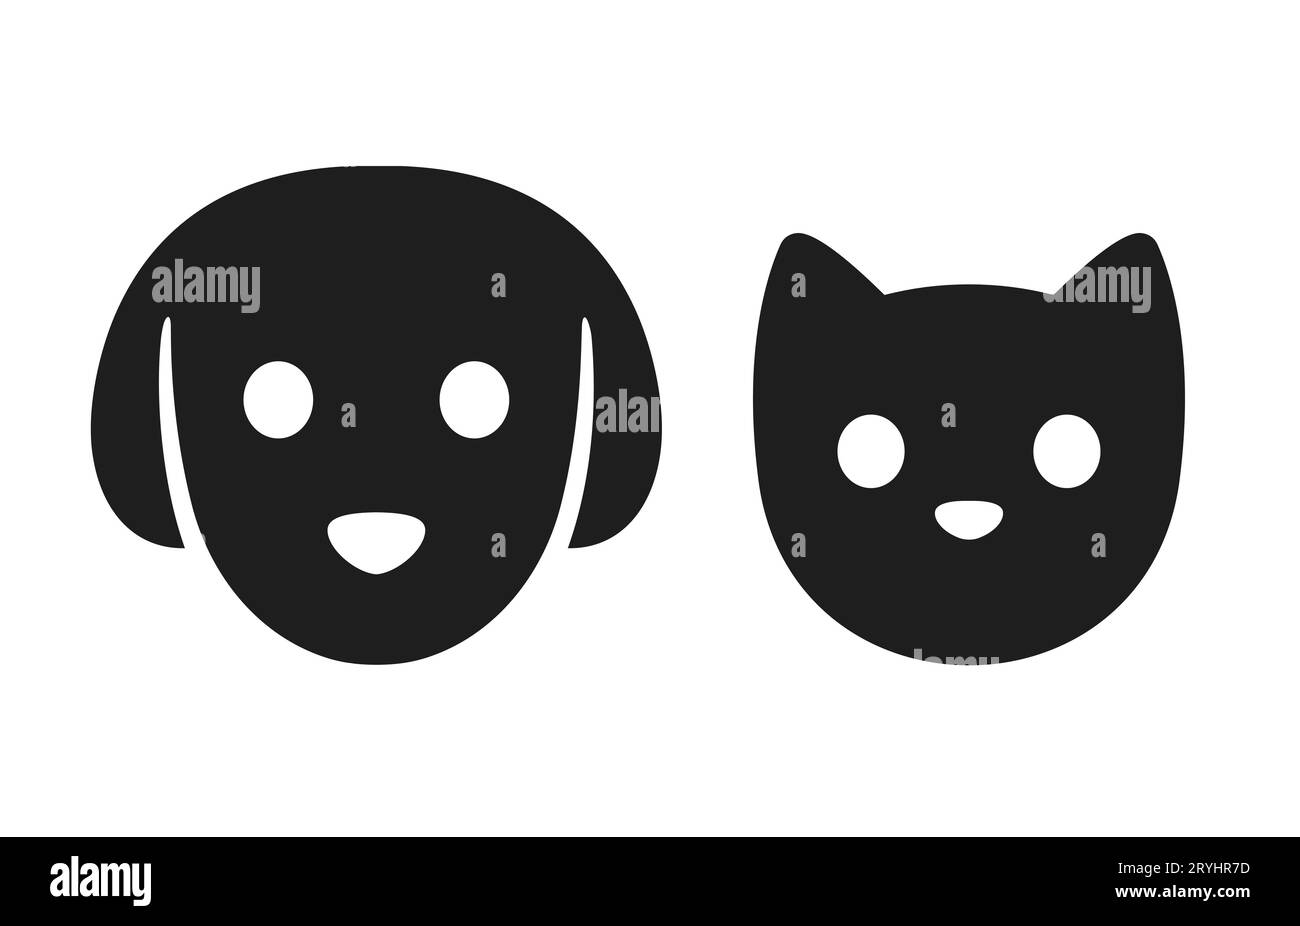 Cat and dog head icon. Simple stylized pet face pictogram, black silhouette with eyes and nose. Vector illustration set. Stock Vector